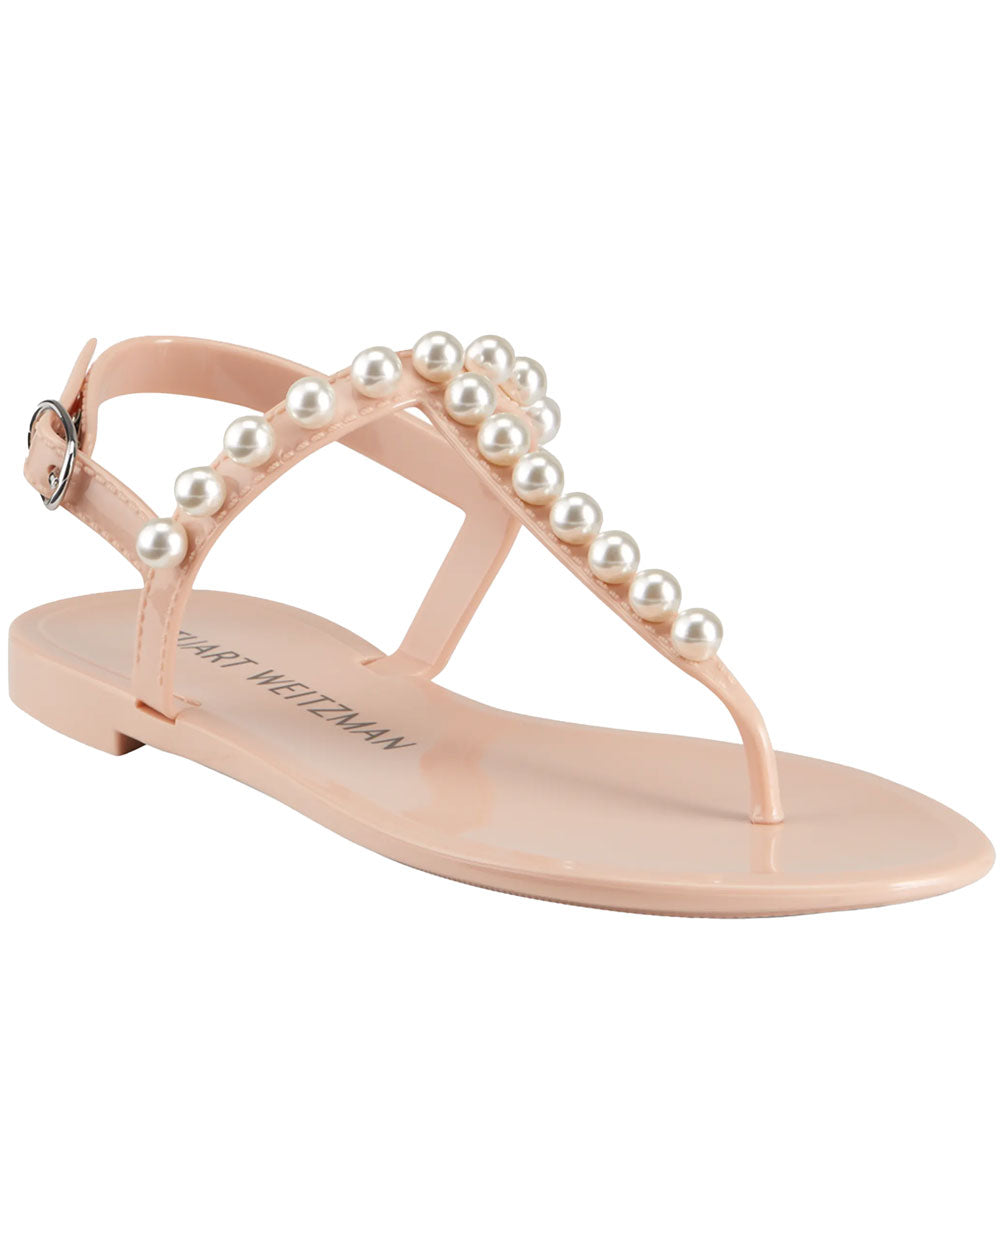 Goldie Jelly Sandals in Poudre